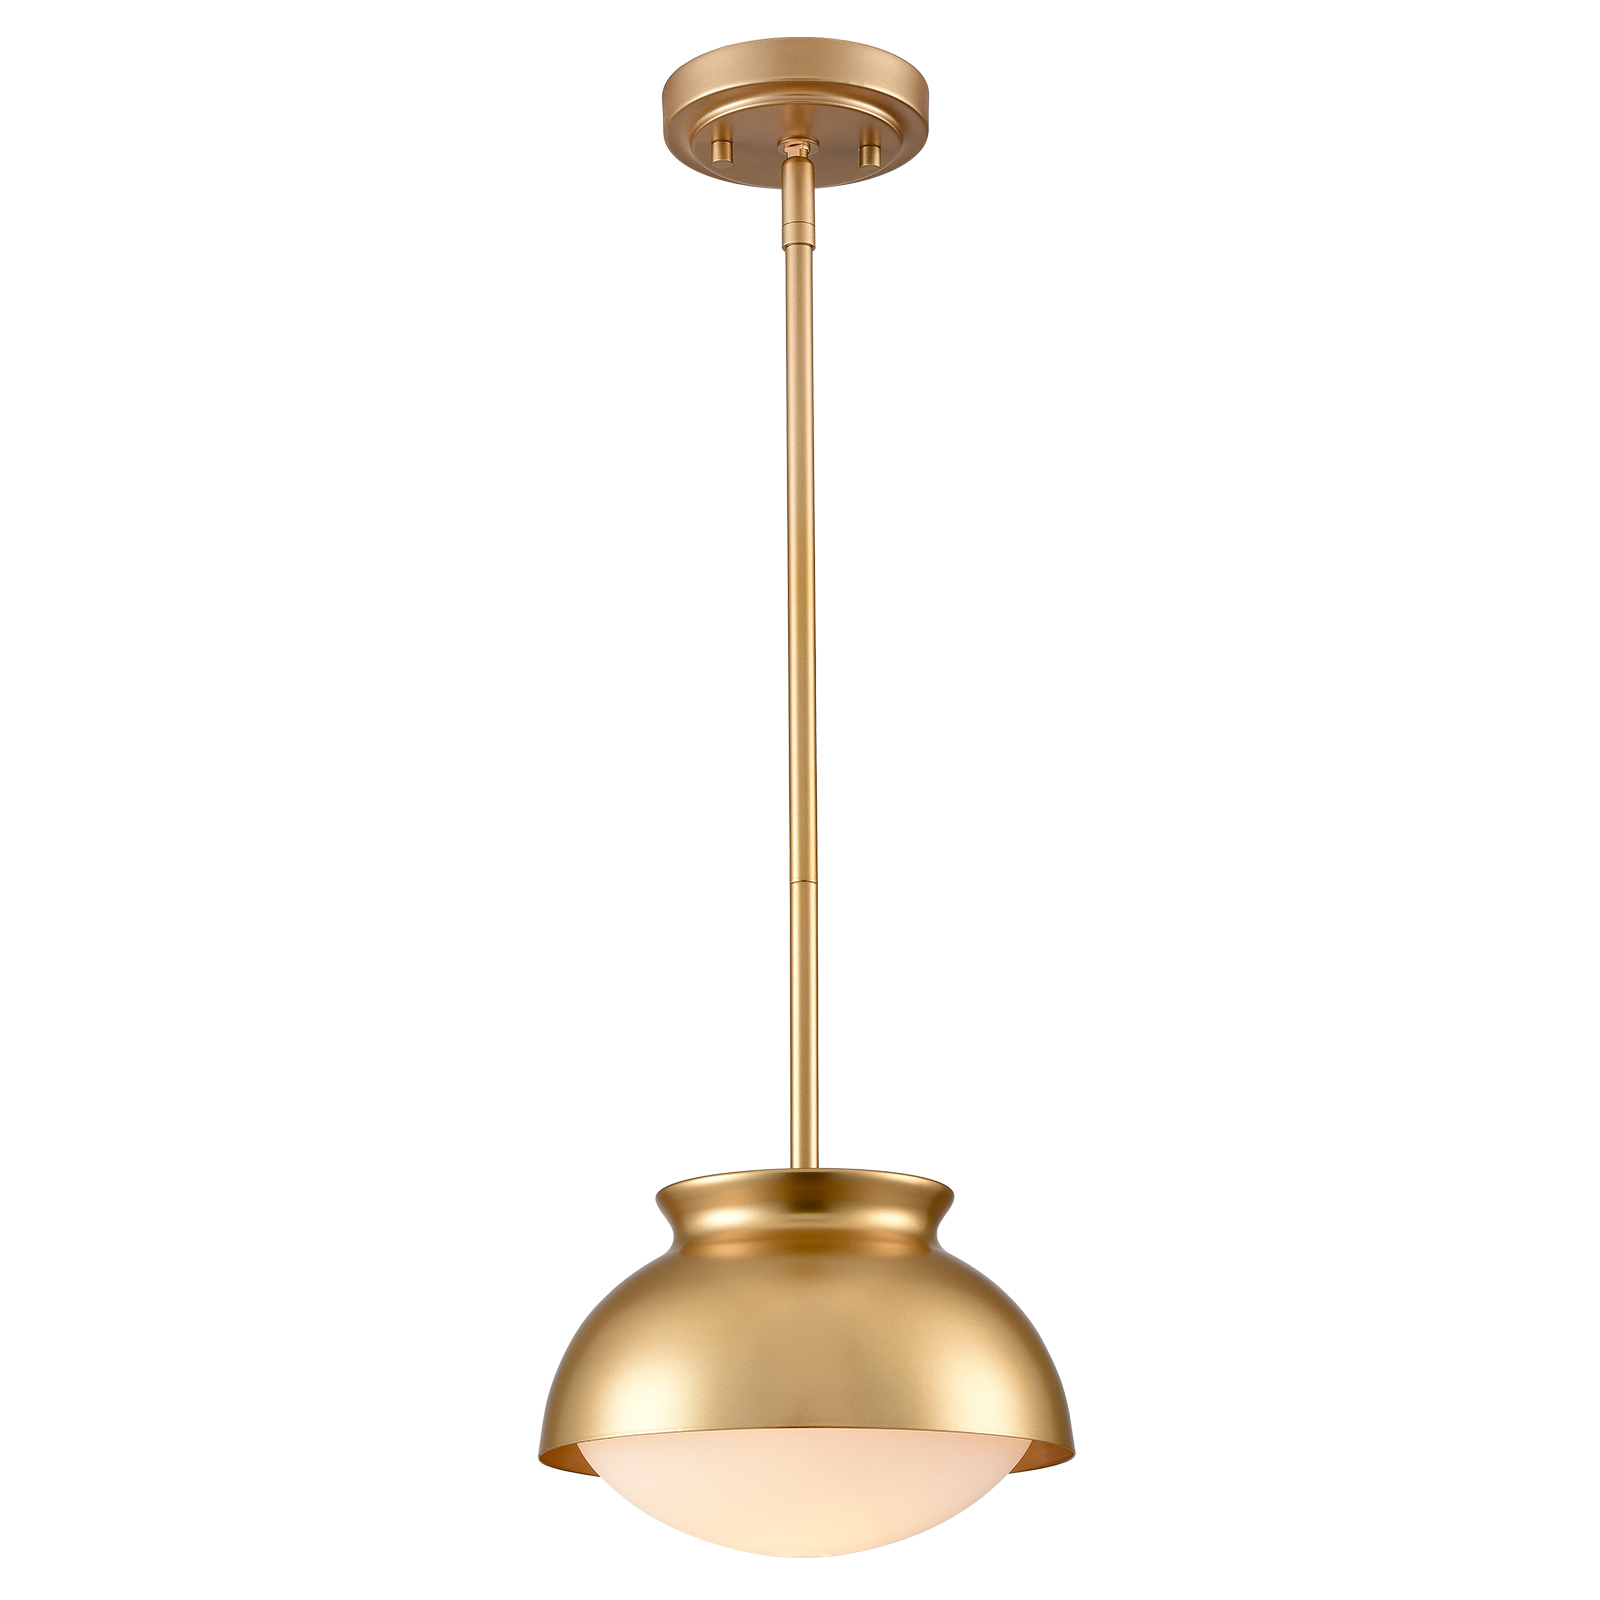 Gold Vintage Pendant Light Fixture with Milk Glass Shade